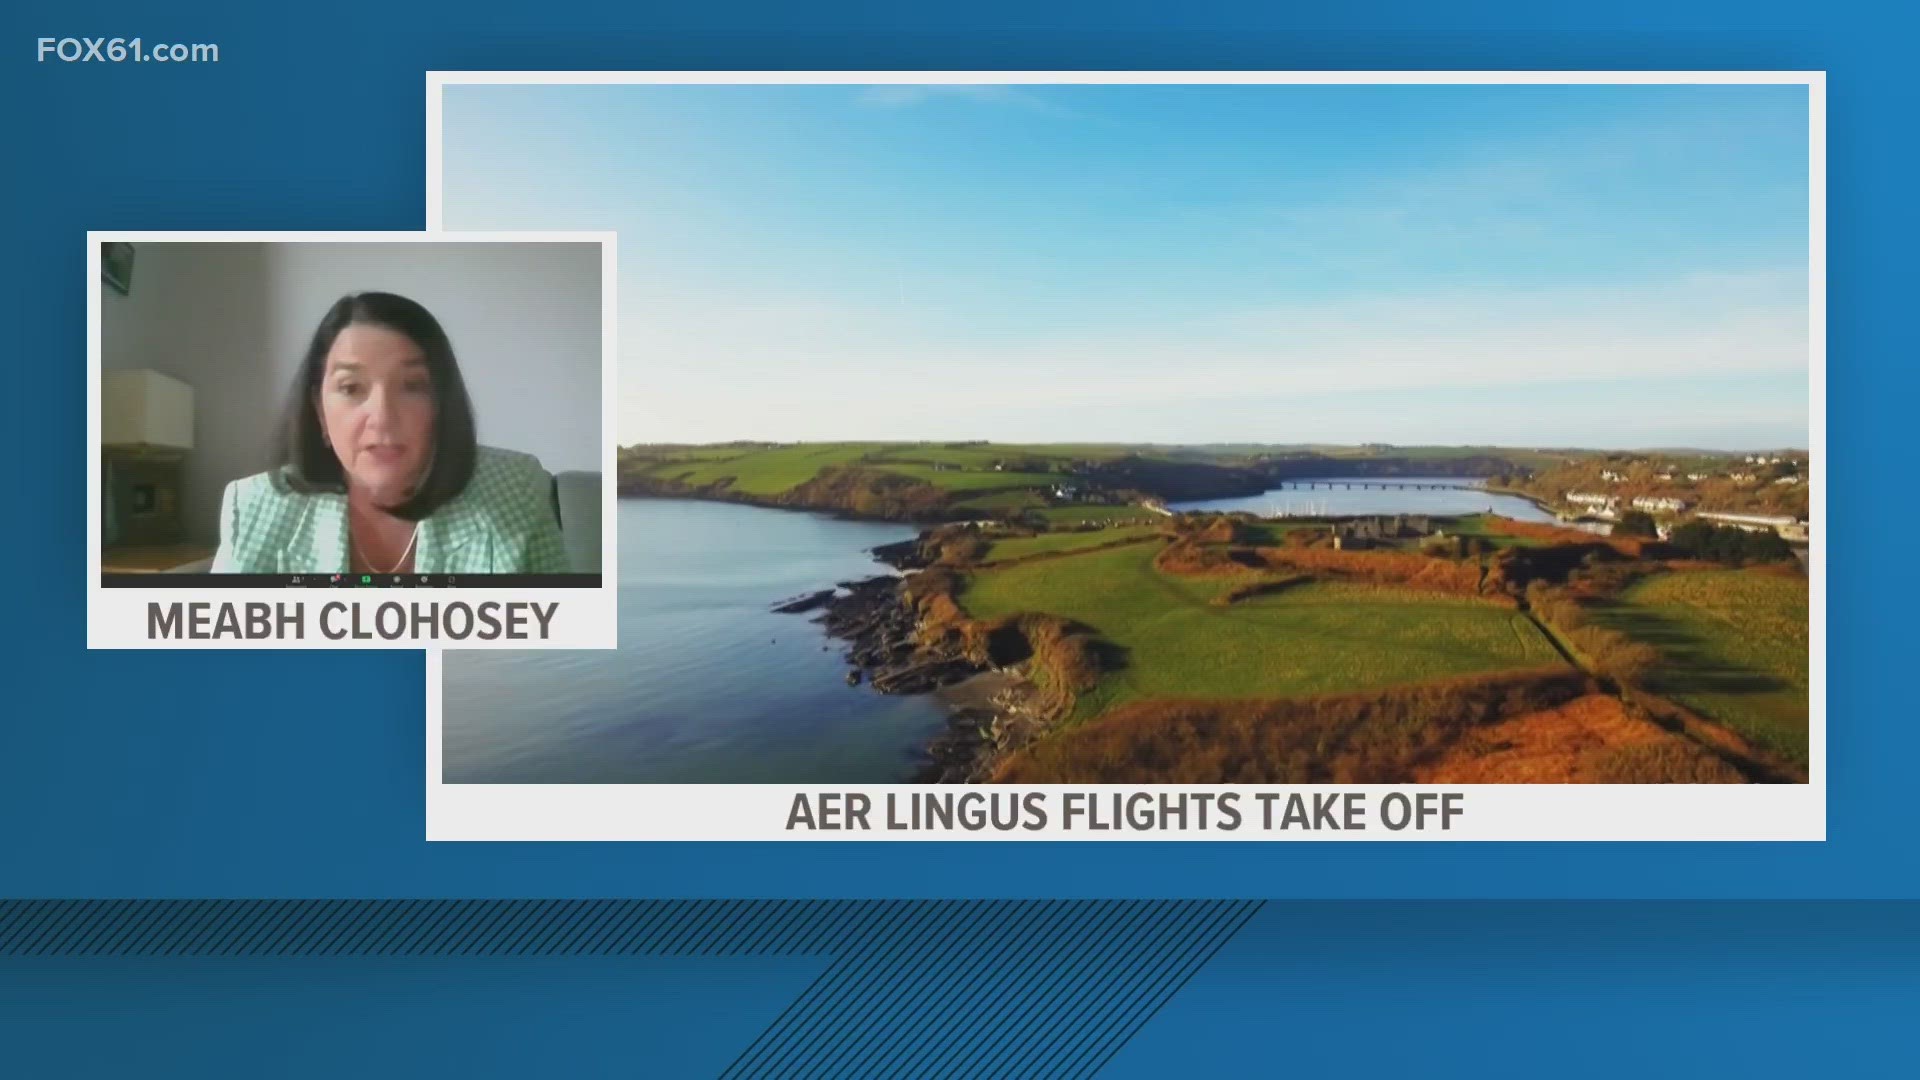 Aer Lingus is returning to Bradley Int'l Airport with flights to Ireland available. Meabh Clohosey talks to FOX61 about the comeback.